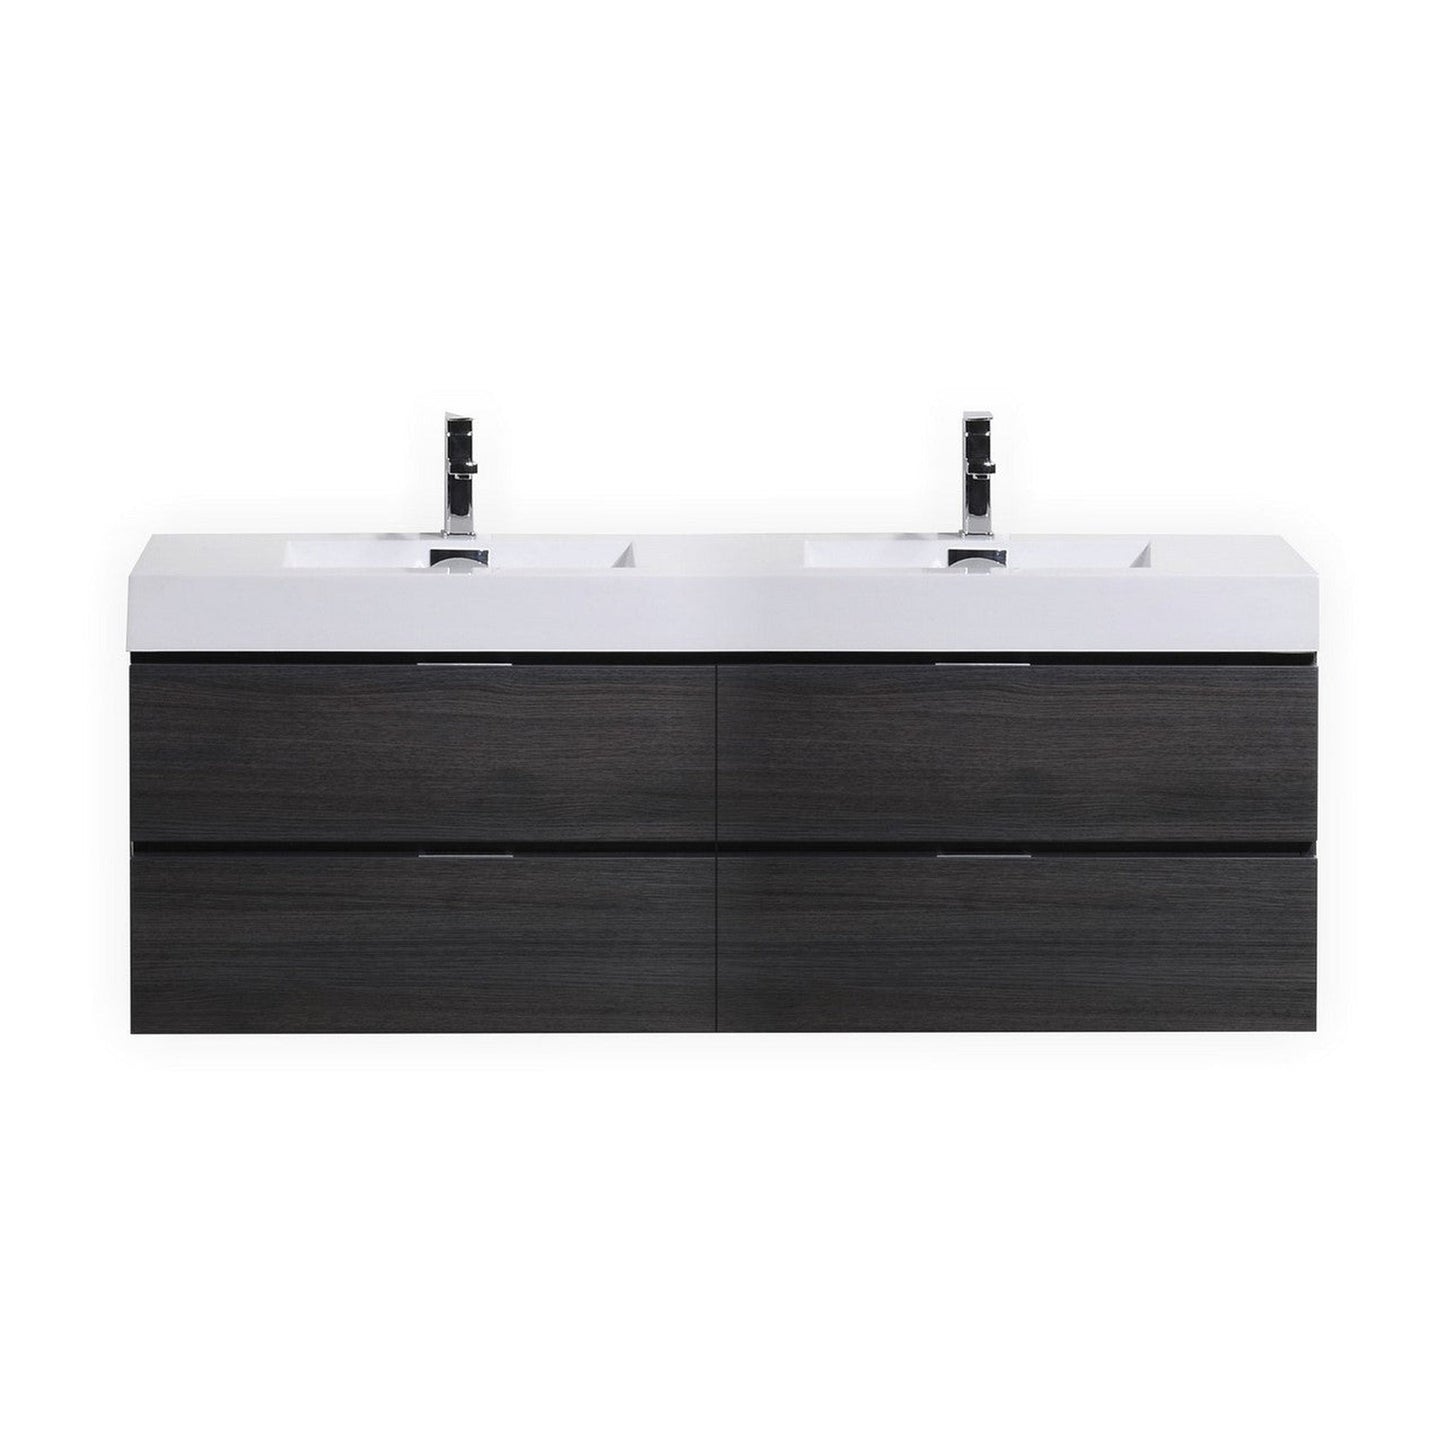 KubeBath Bliss 72" Gray Oak Wall-Mounted Modern Bathroom Vanity With Double Integrated Acrylic Sink With Overflow and 22" Gray Oak Framed Two Mirrors With Shelf